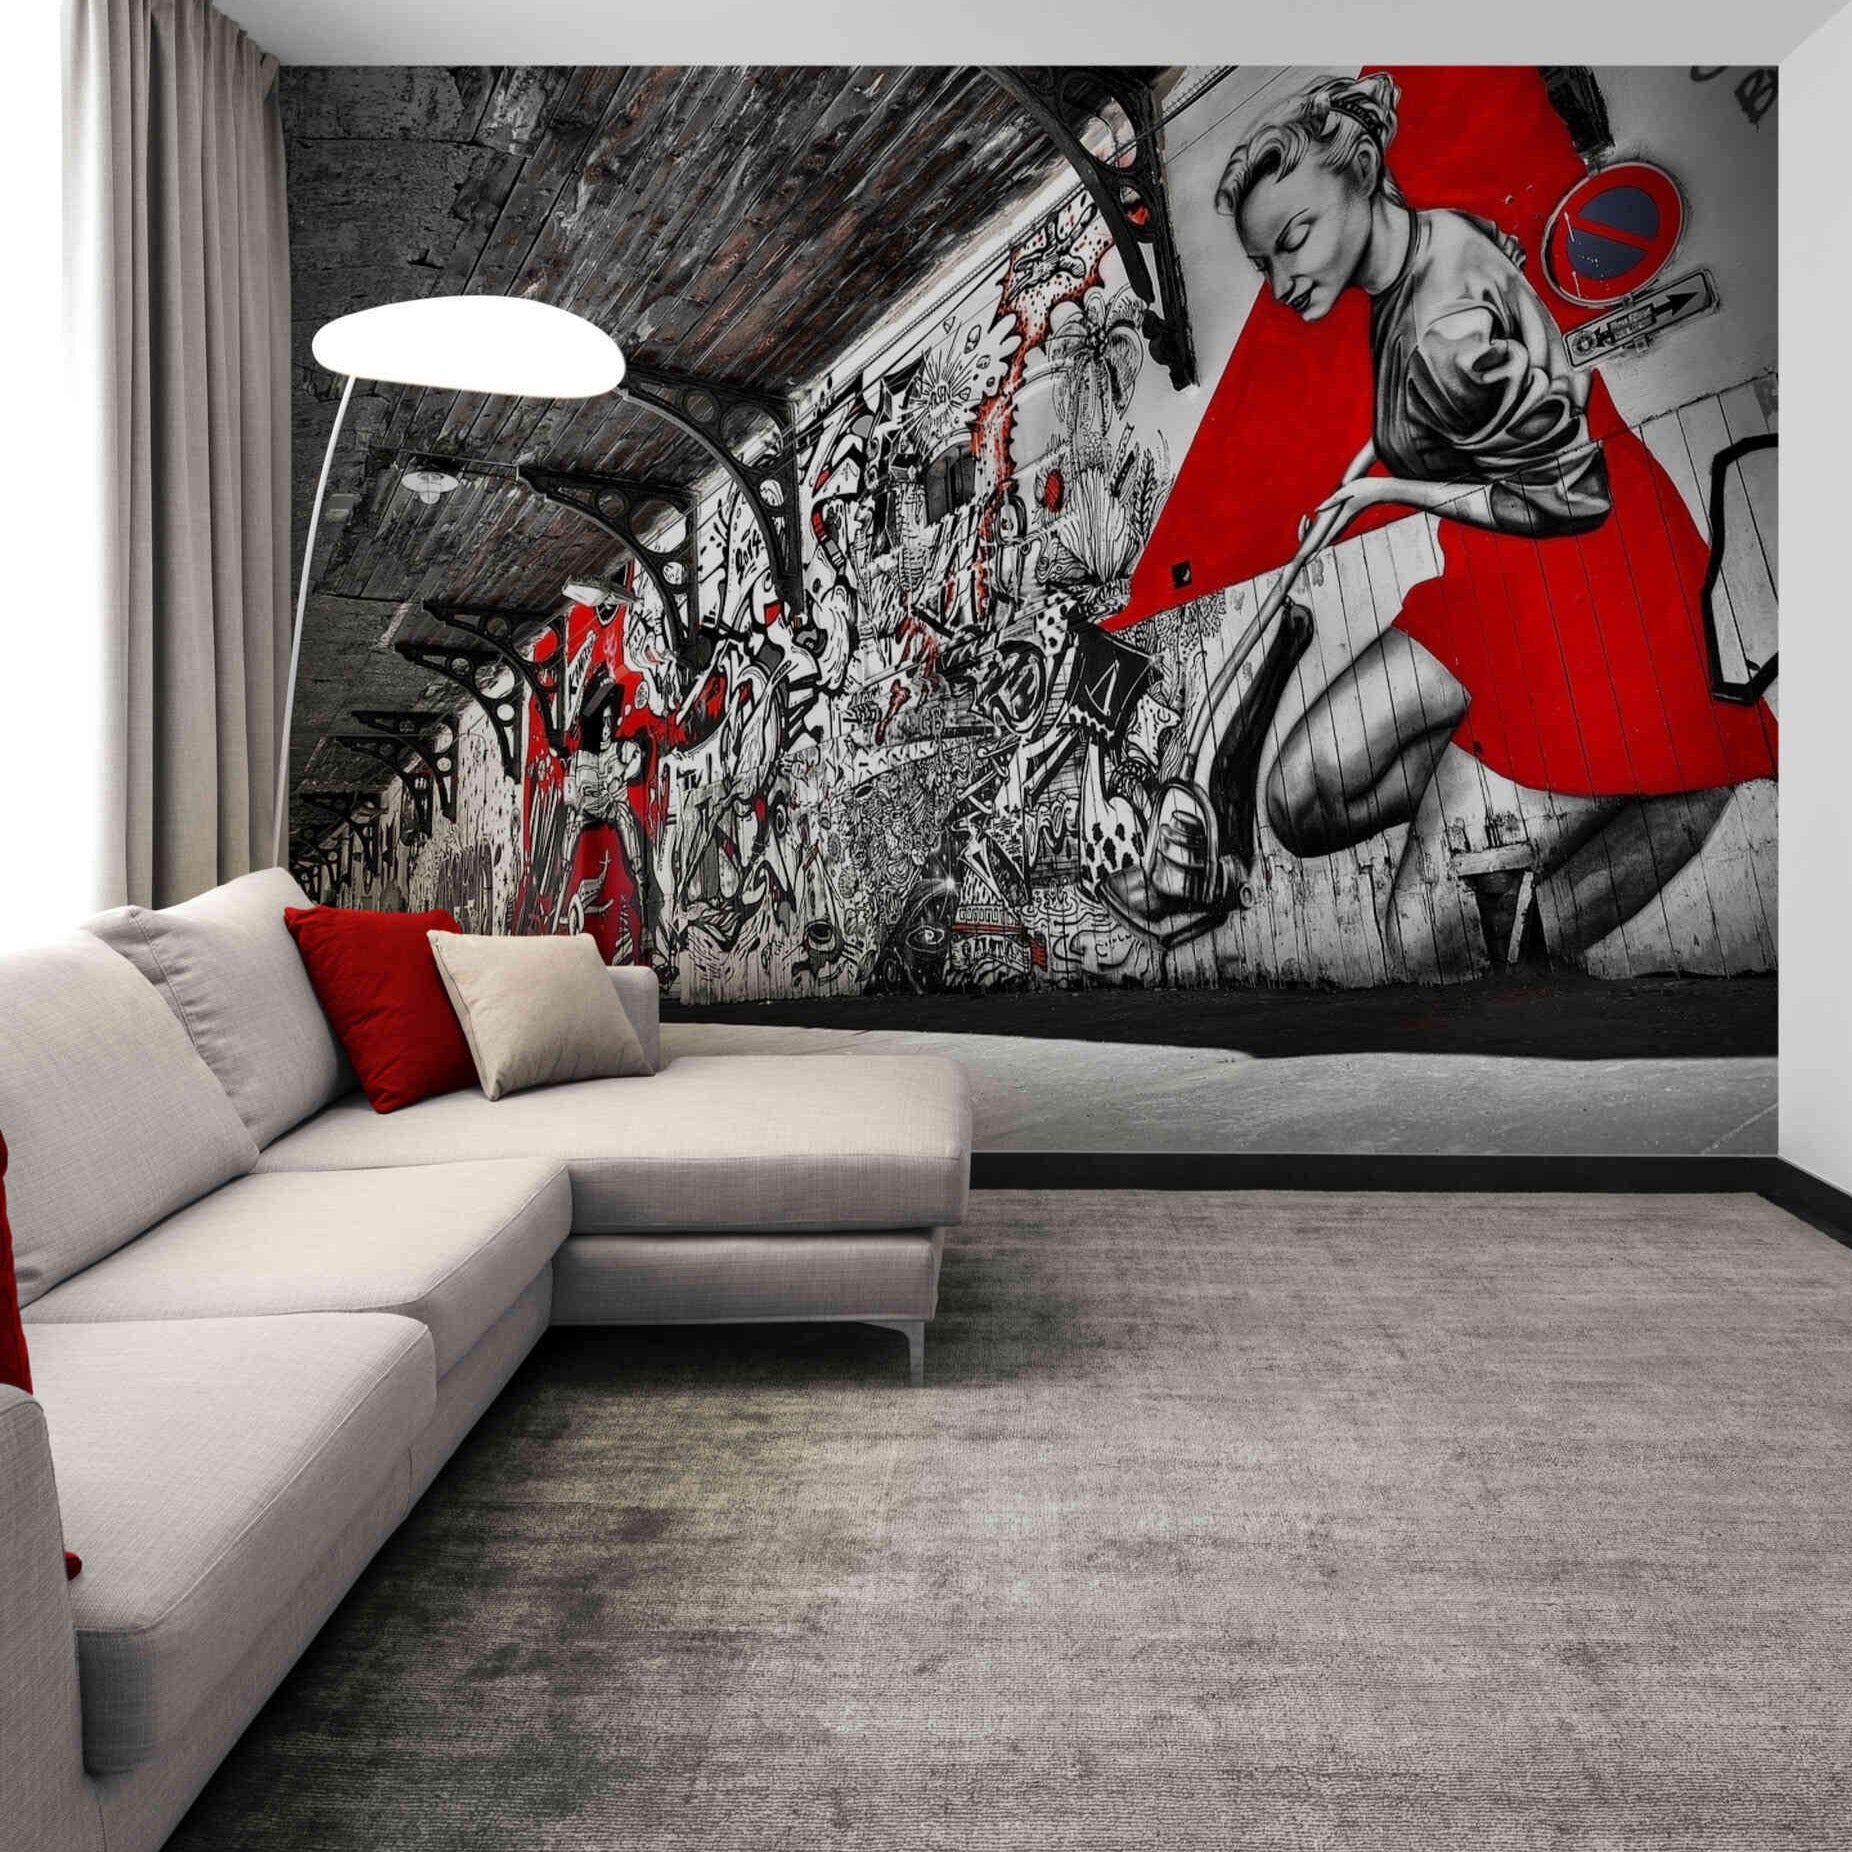 Vibrant urban art explosion in a graffiti wall mural, perfect for adding a splash of color and creativity.